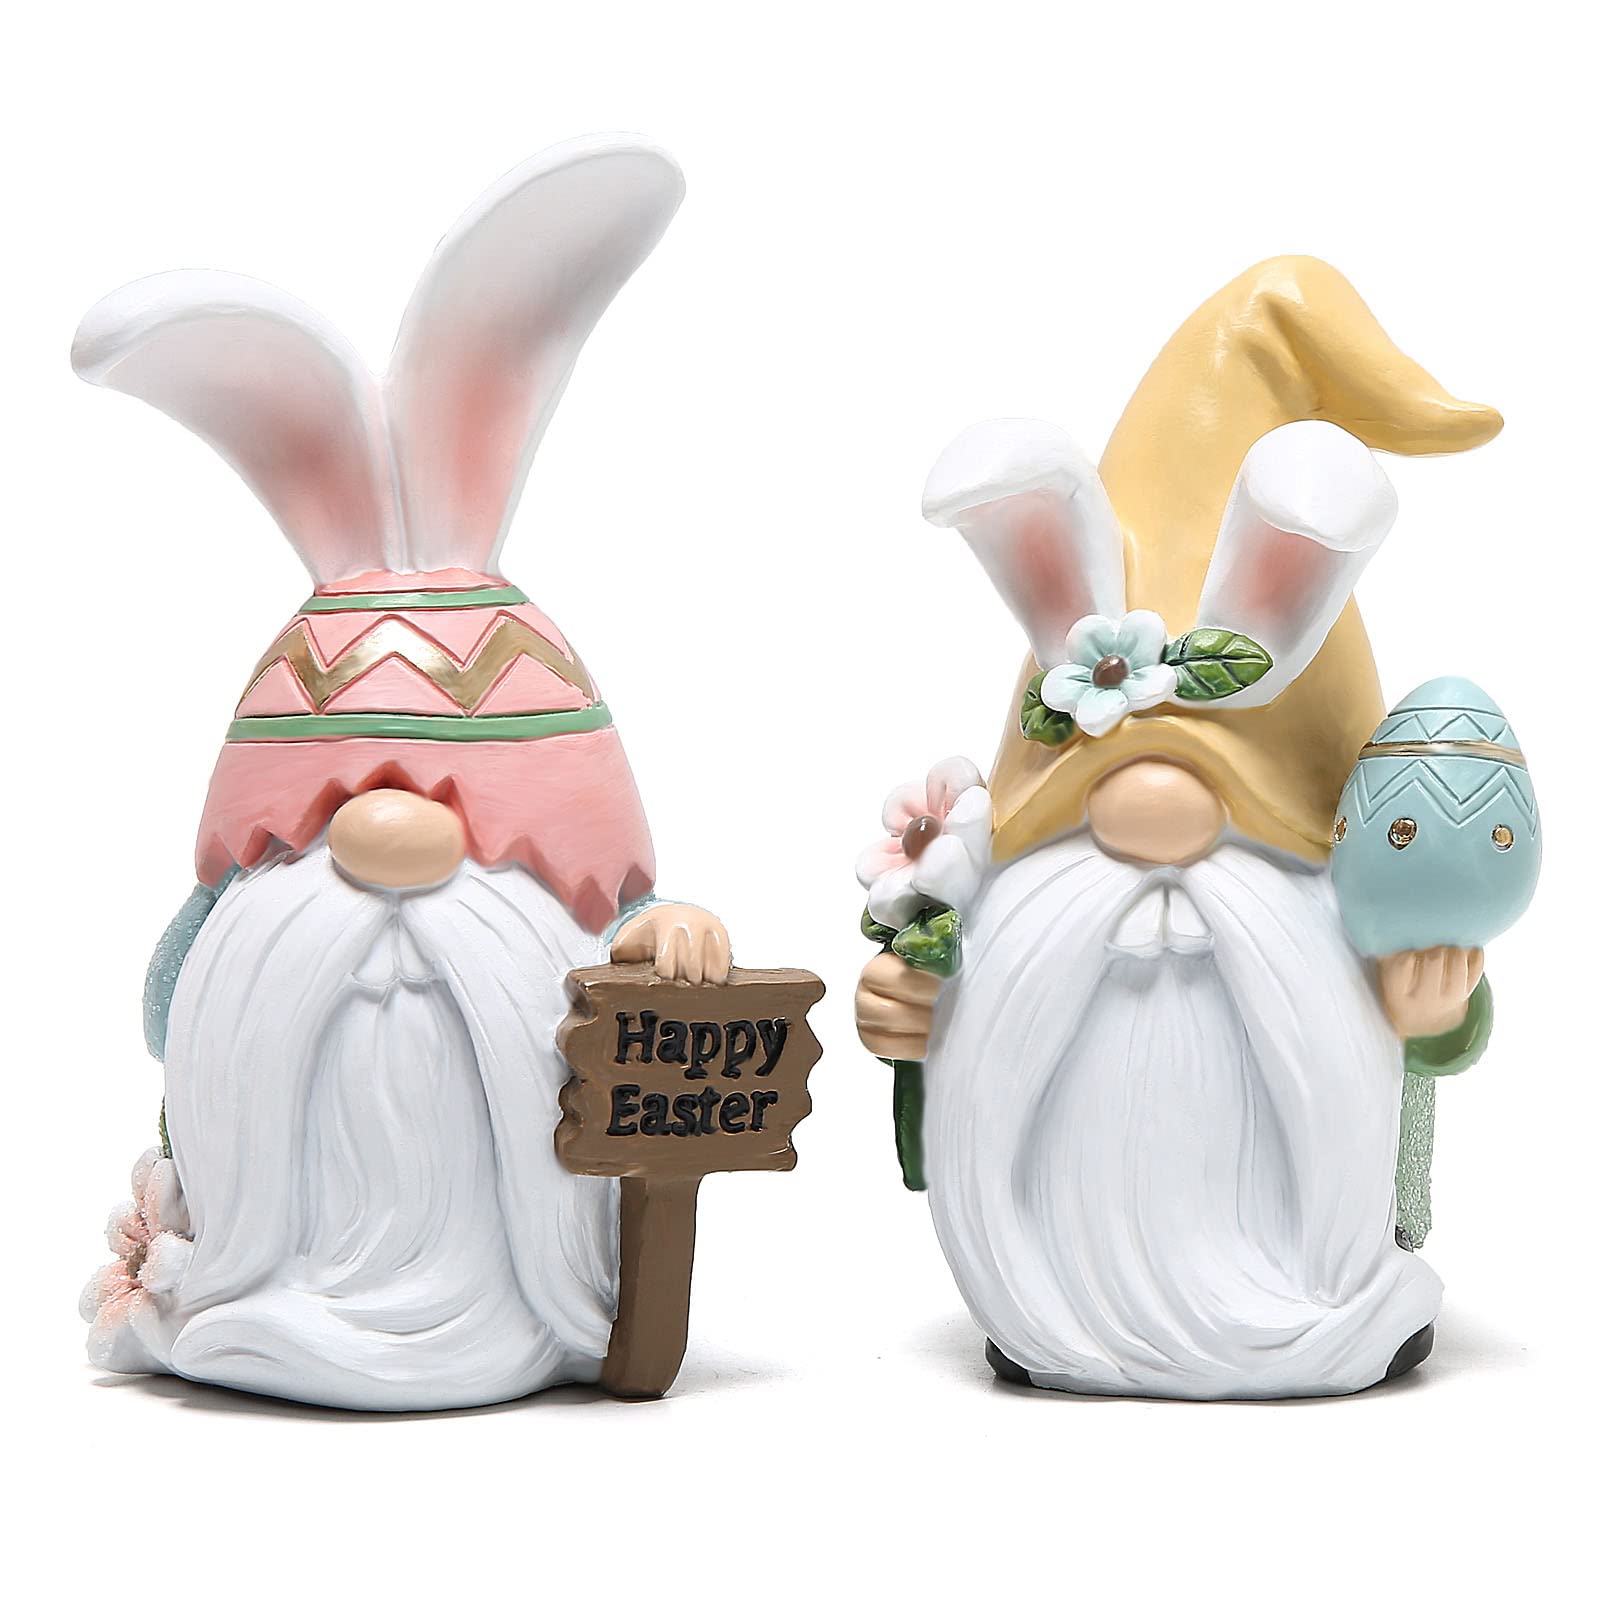 Hodao 2 Pack Easter Decorations Easter gnomes Decor Resin Easter Bunny Doll Decoration Home Ornaments Table Decor Valent